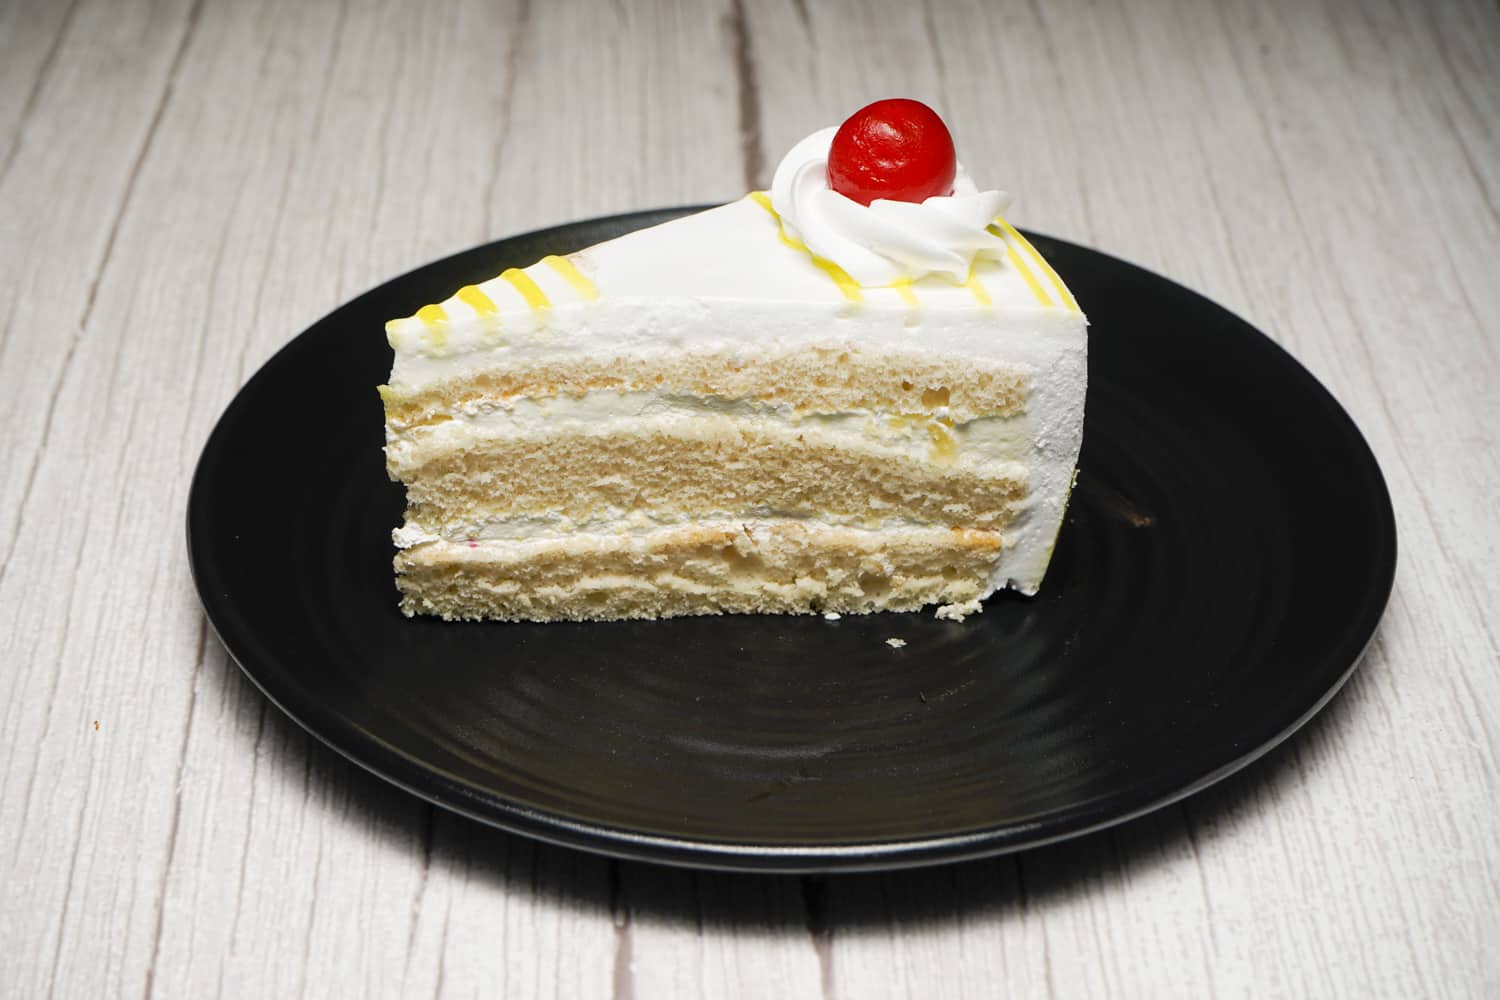 Get Deals and Offers at The Cake Mistri, Near Punjab National Bank, Paschim  Vihar,Delhi | Dineout